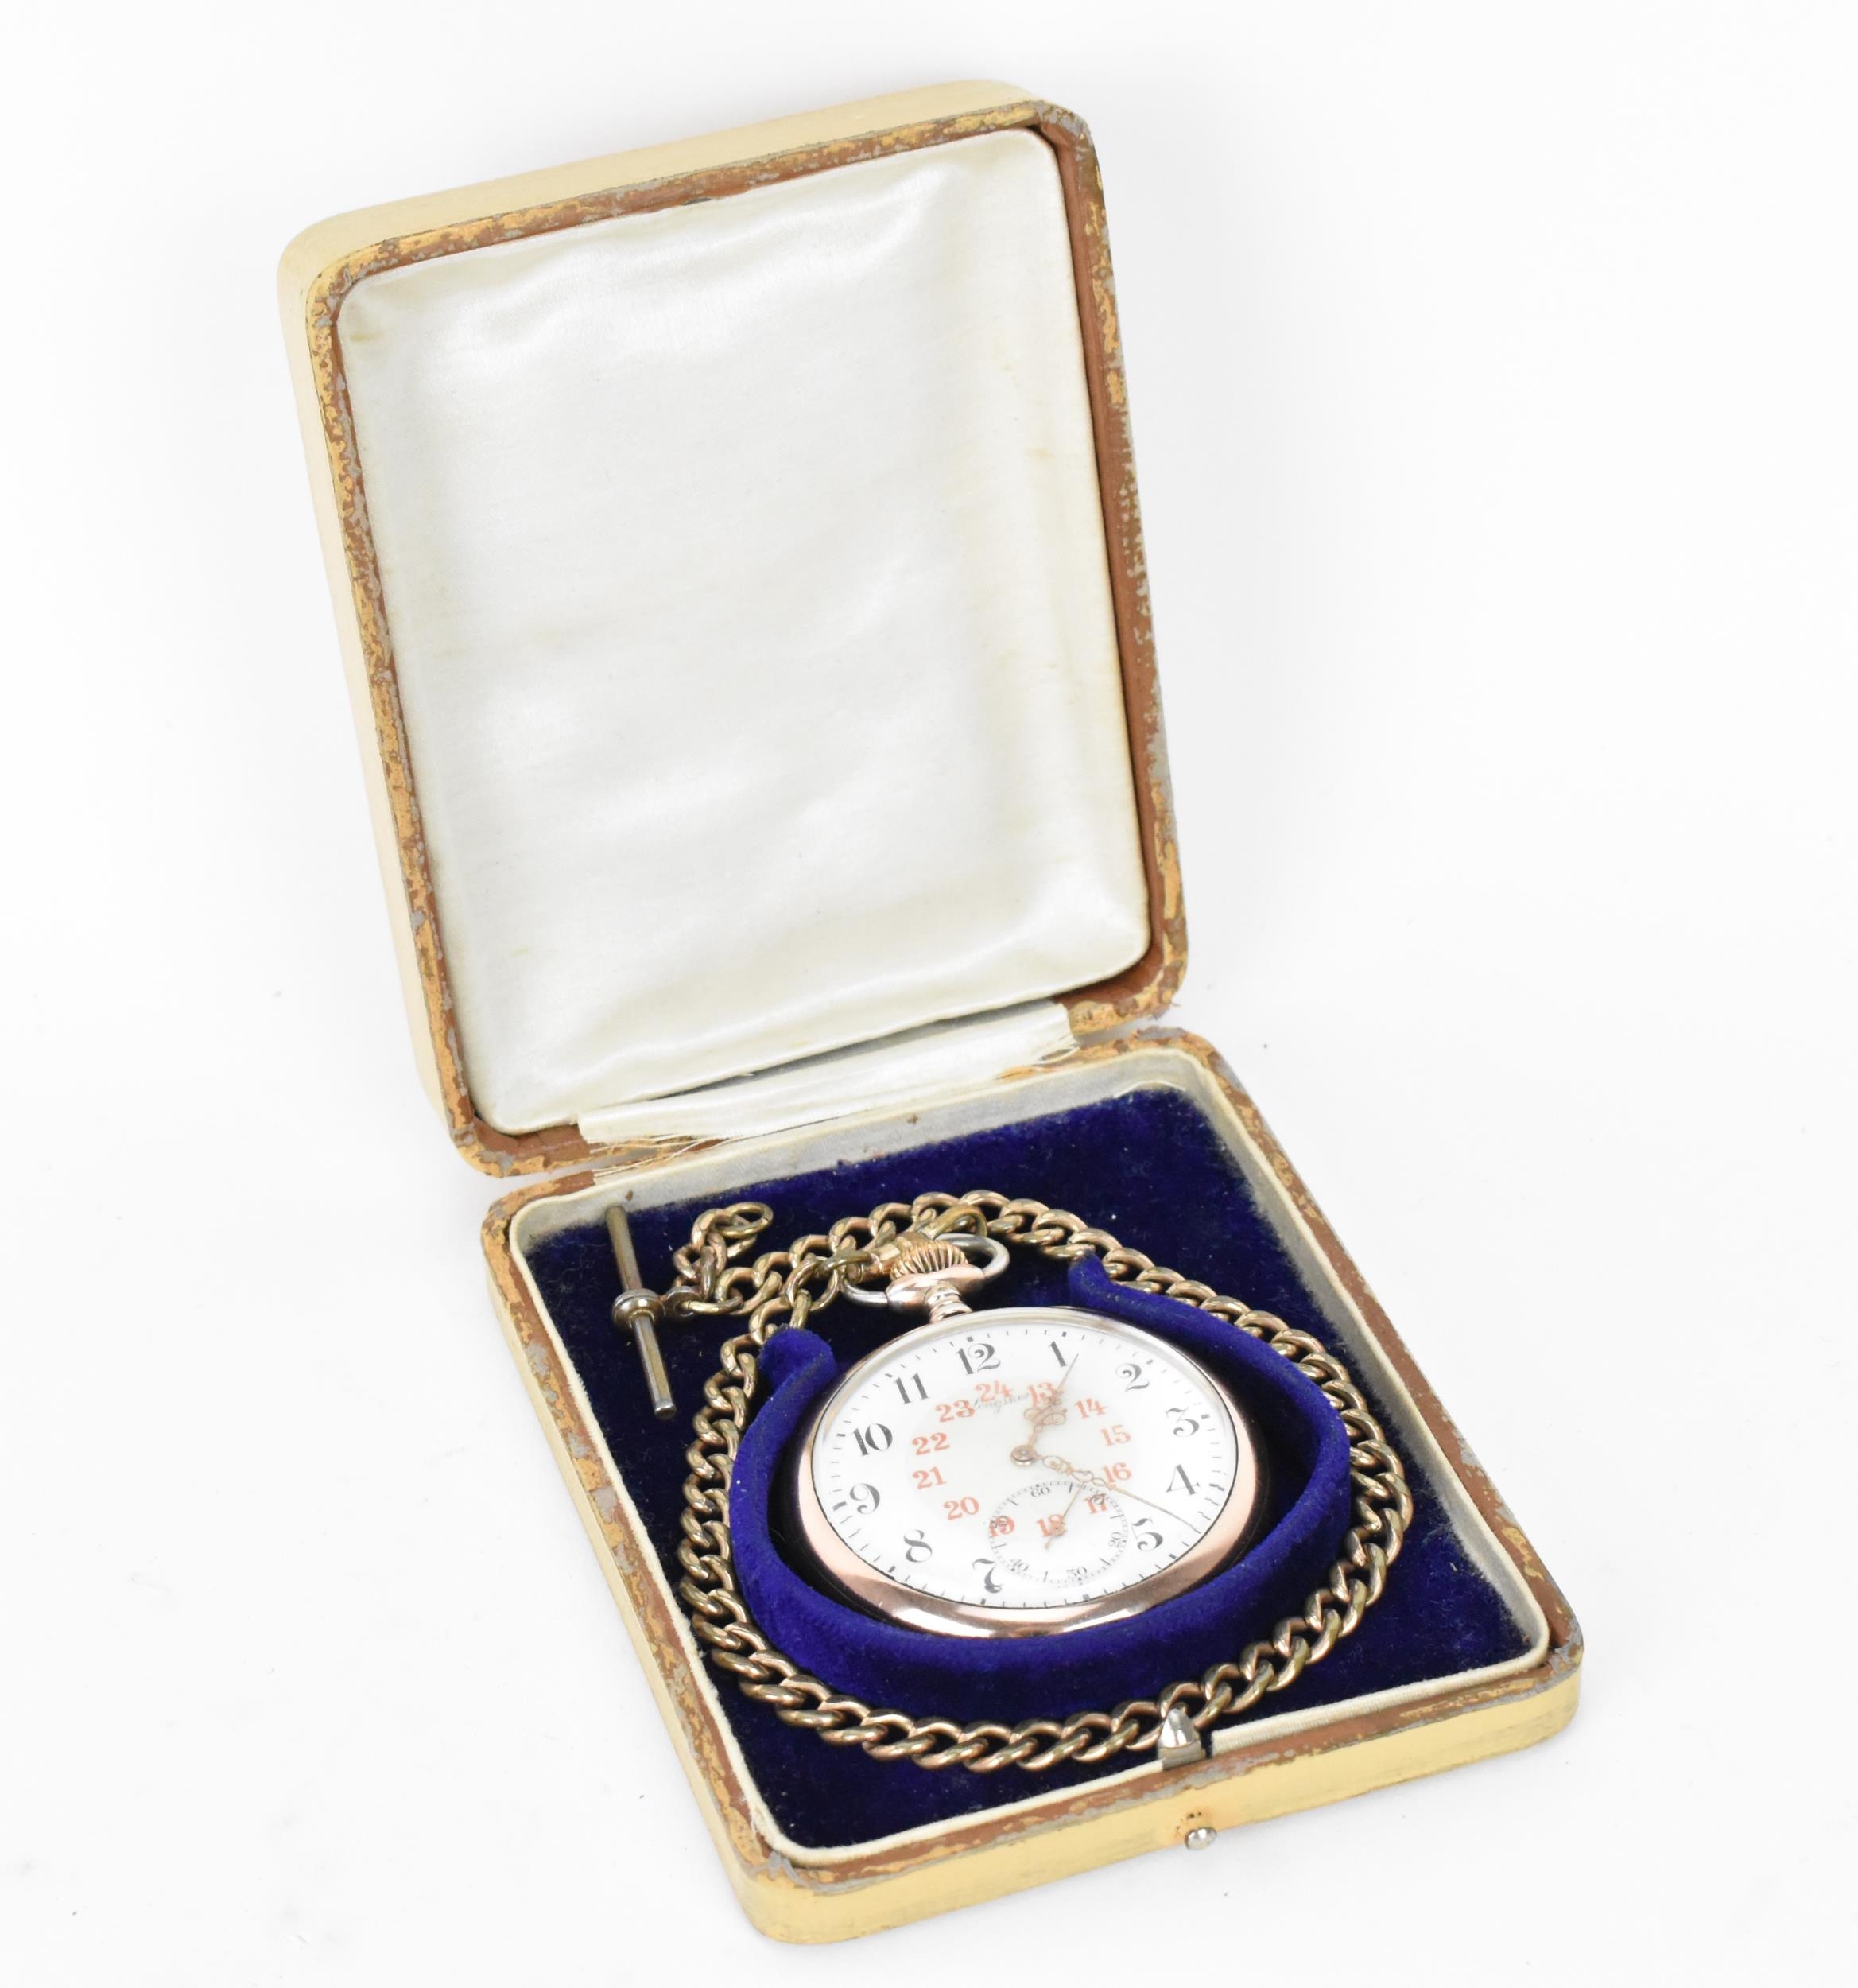 An early 20th century Longines silver cased, open faced pocket watch having a white enamel dial, - Image 5 of 6